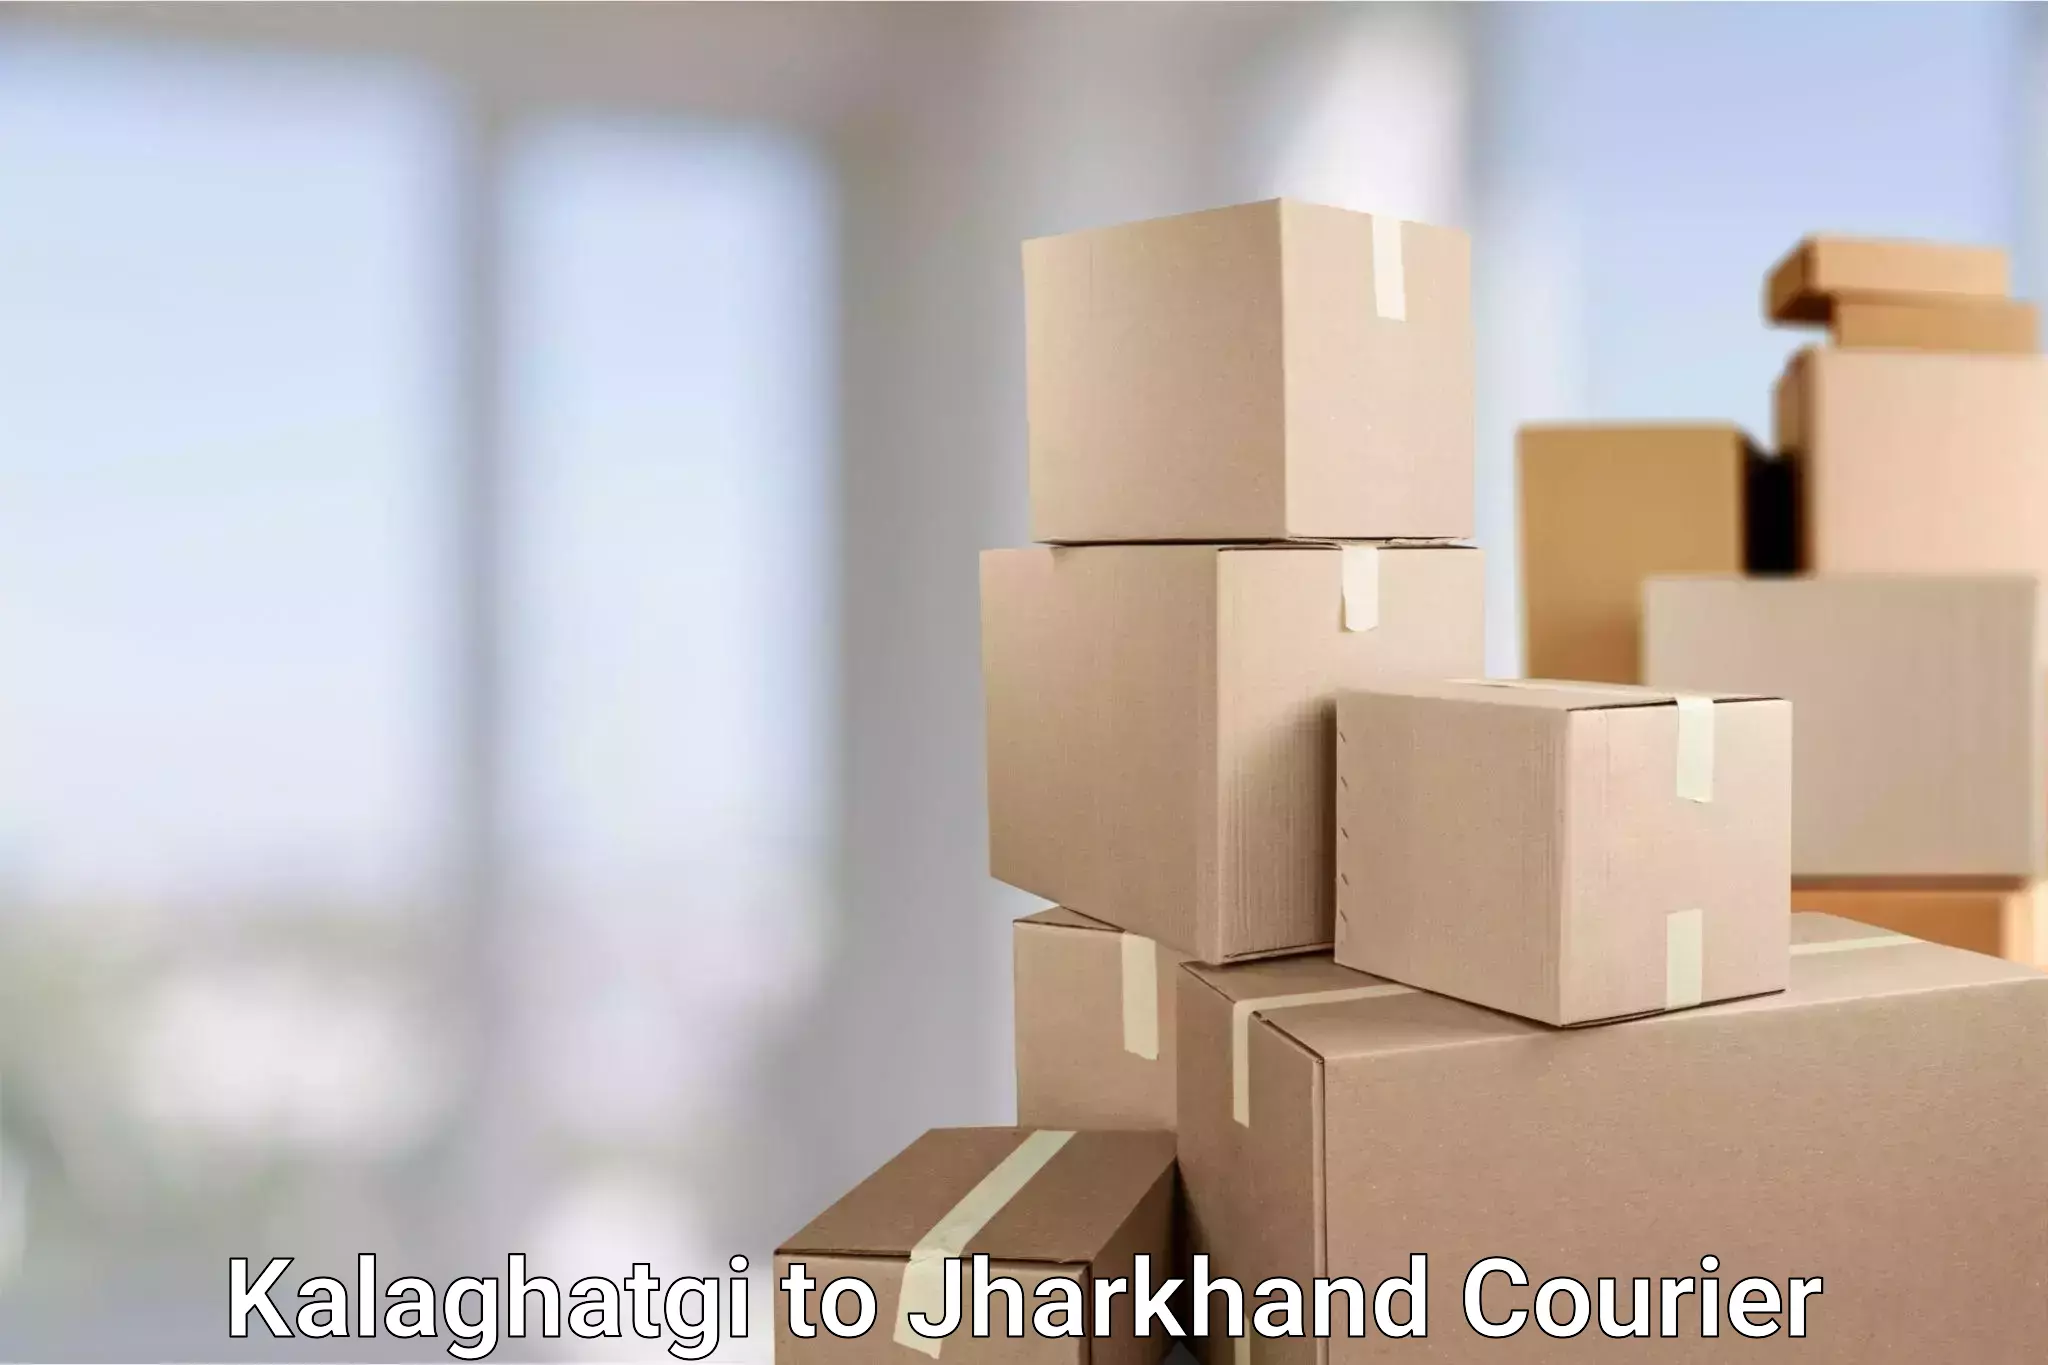 Reliable courier services Kalaghatgi to Jharkhand